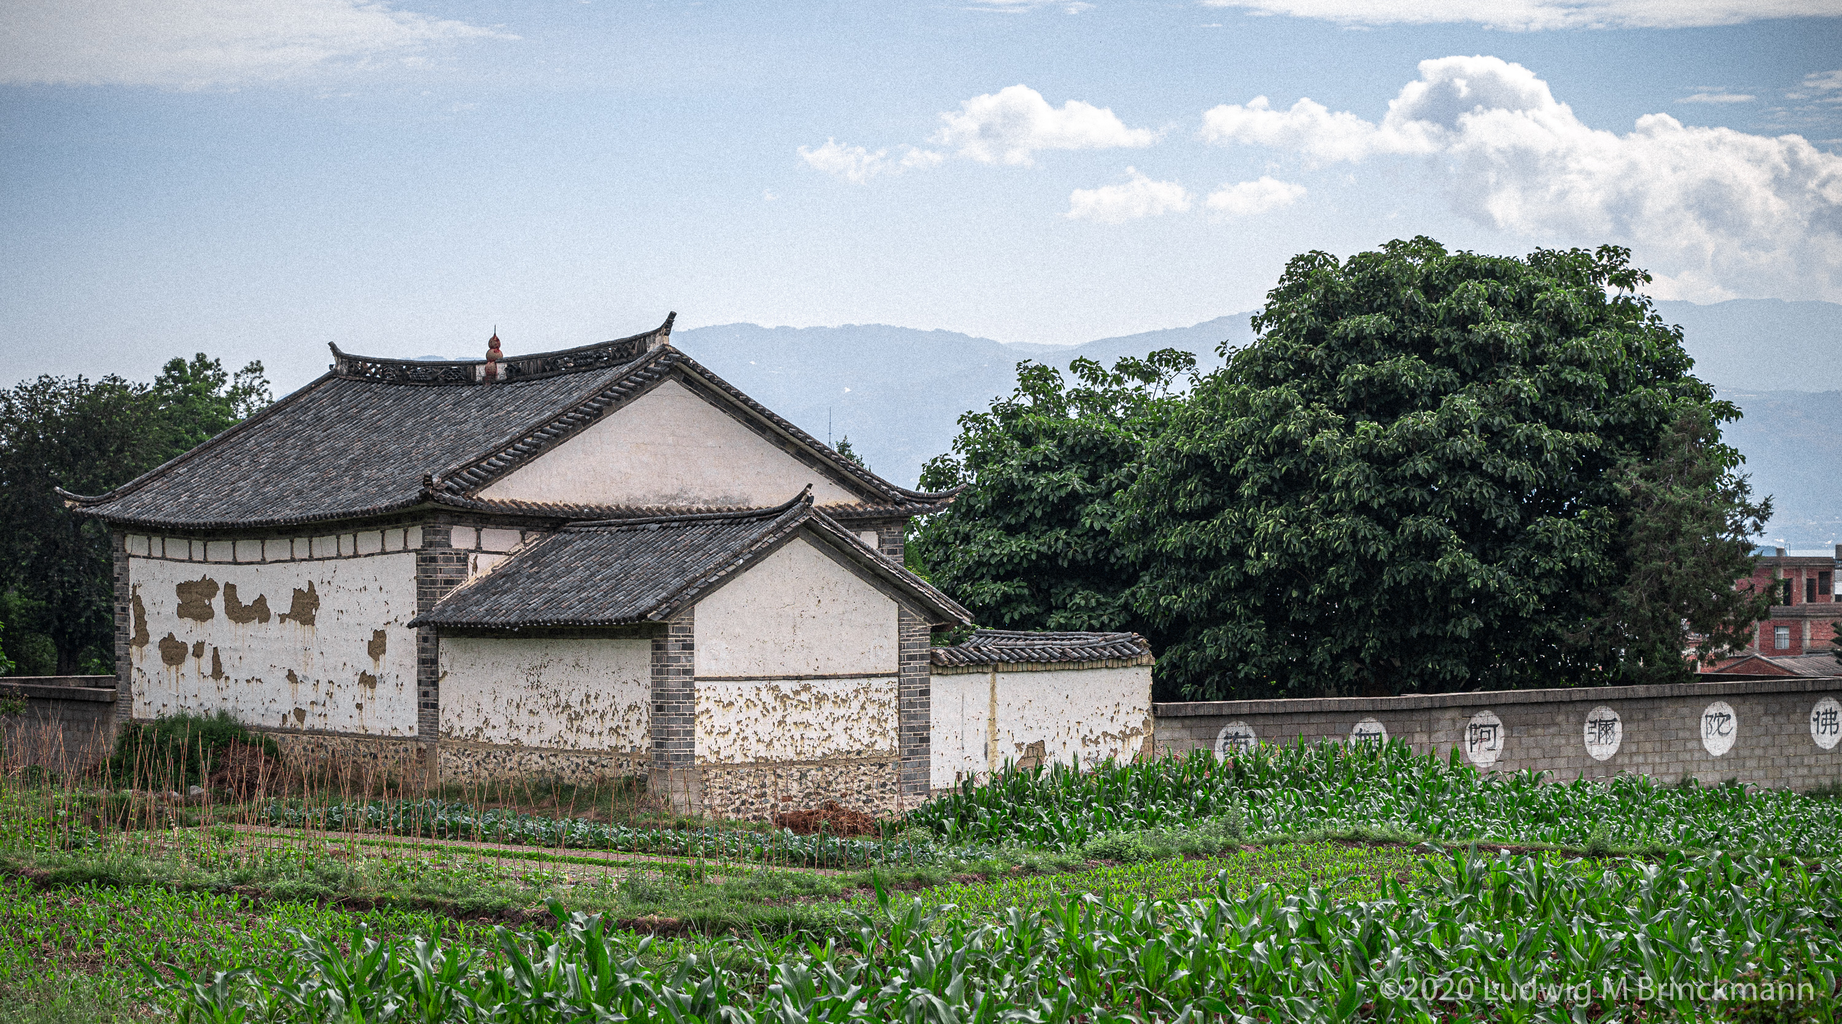 Picture: A more or less abandoned temple in honour of 段思平, the founder of the Dali Kingdom